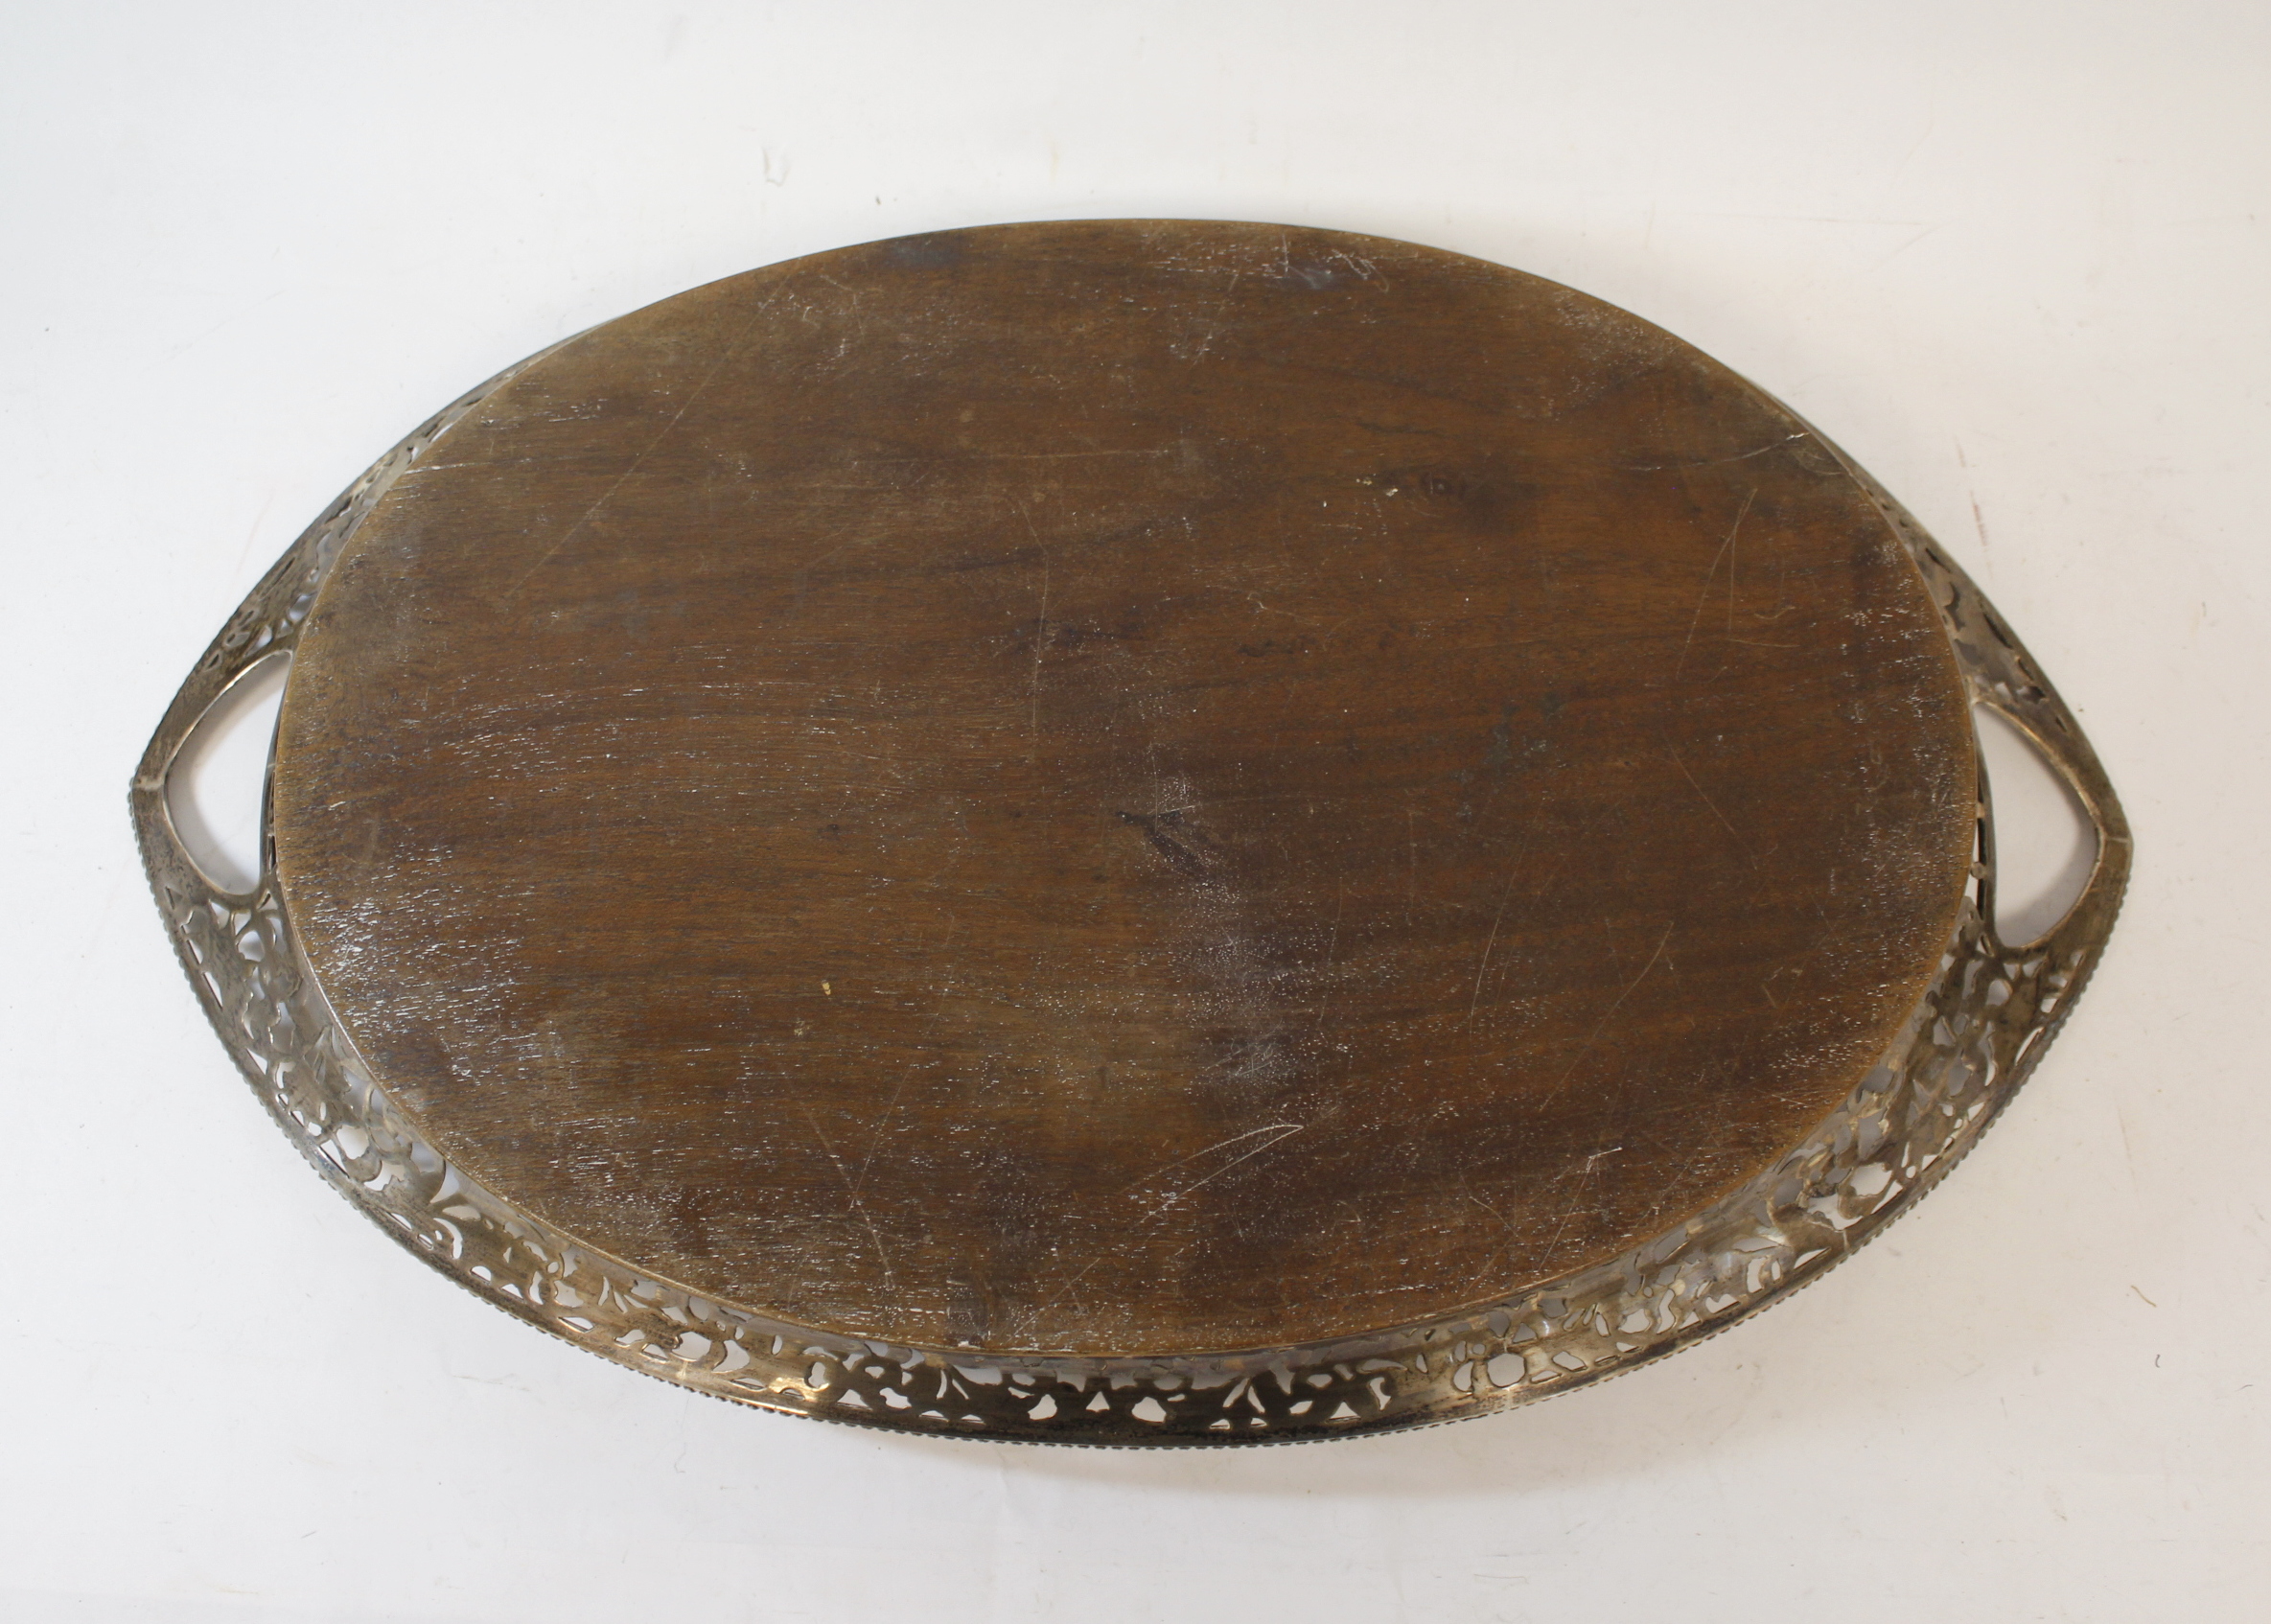 Dutch burr walnut oval tray with pierced and engraved silver gallery, Import Marks, 1908, 50cm. - Image 4 of 5